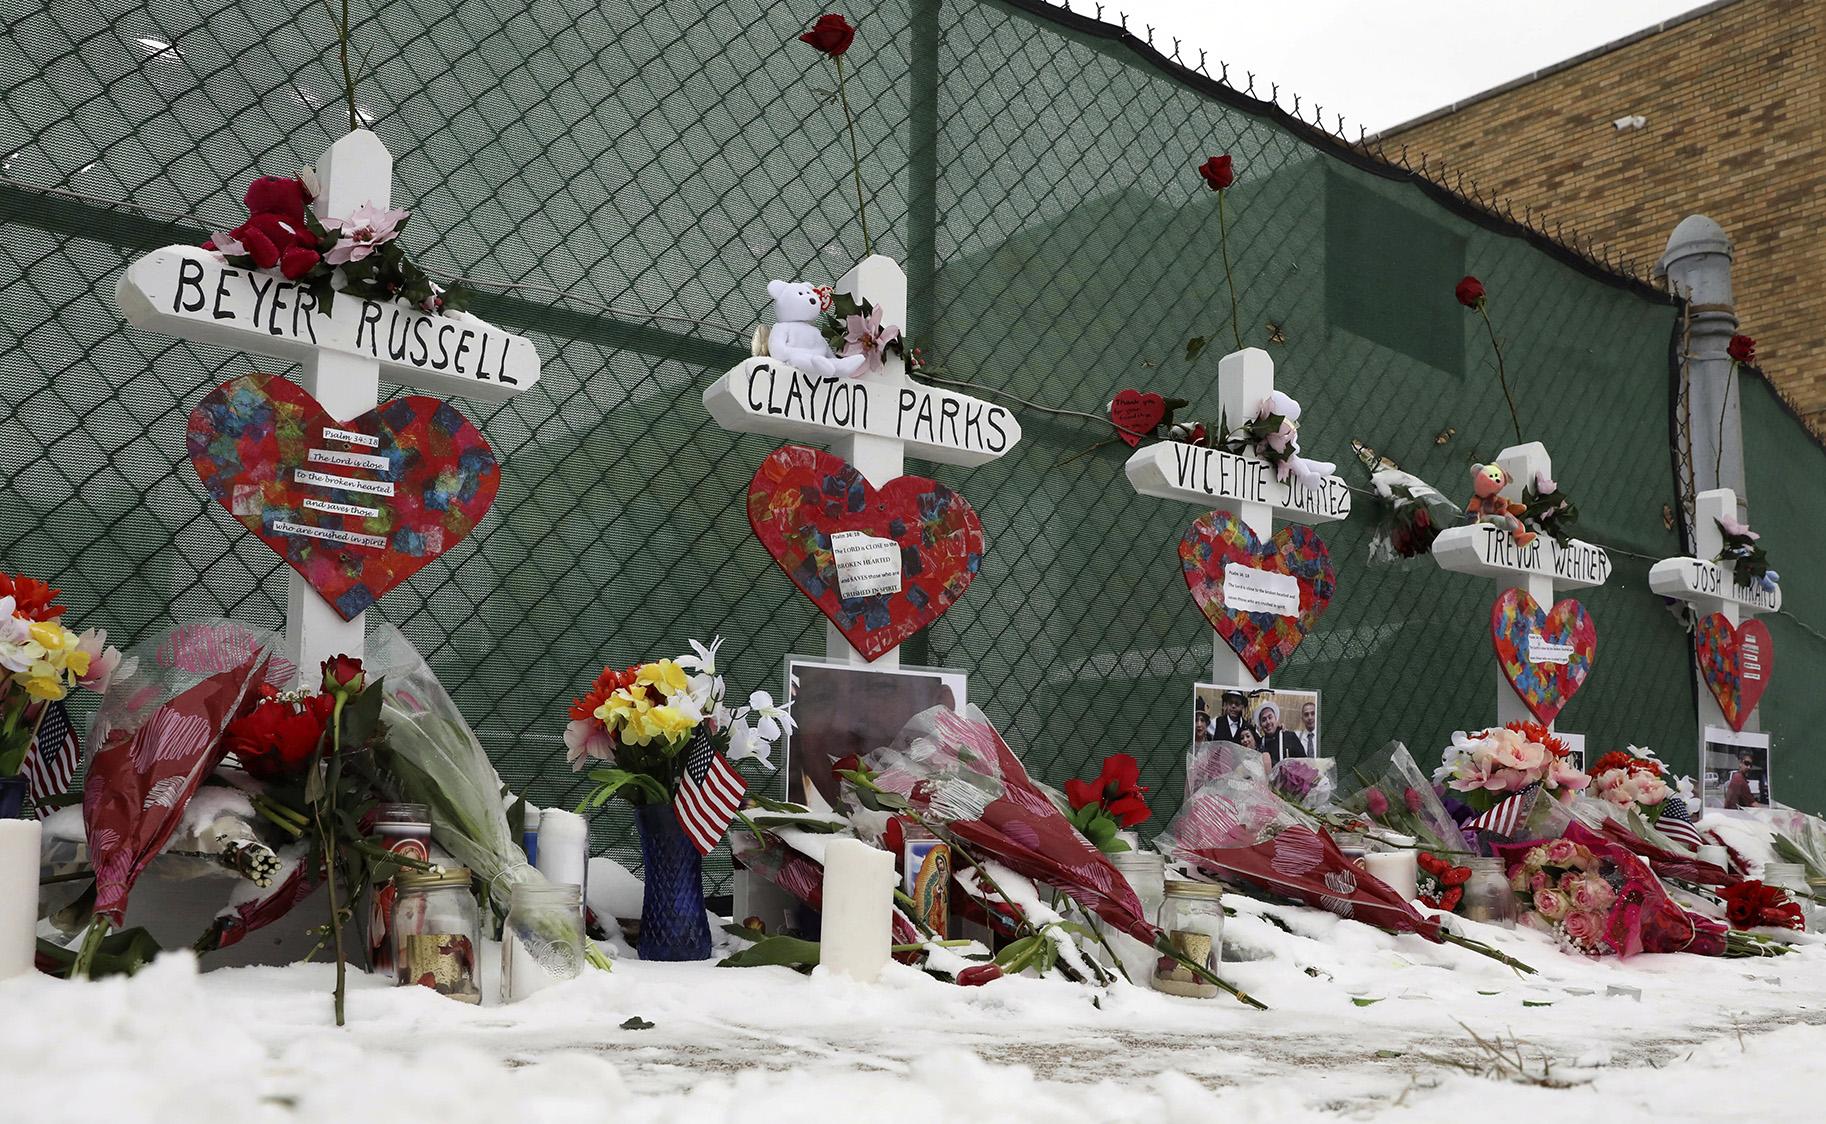 Crosses are placed for the victims of a mass shooting Sunday, Feb. 17, 2019, in Aurora, near Henry Pratt Co. manufacturing company where several were killed on Friday. (AP Photo / Nam Y. Huh)